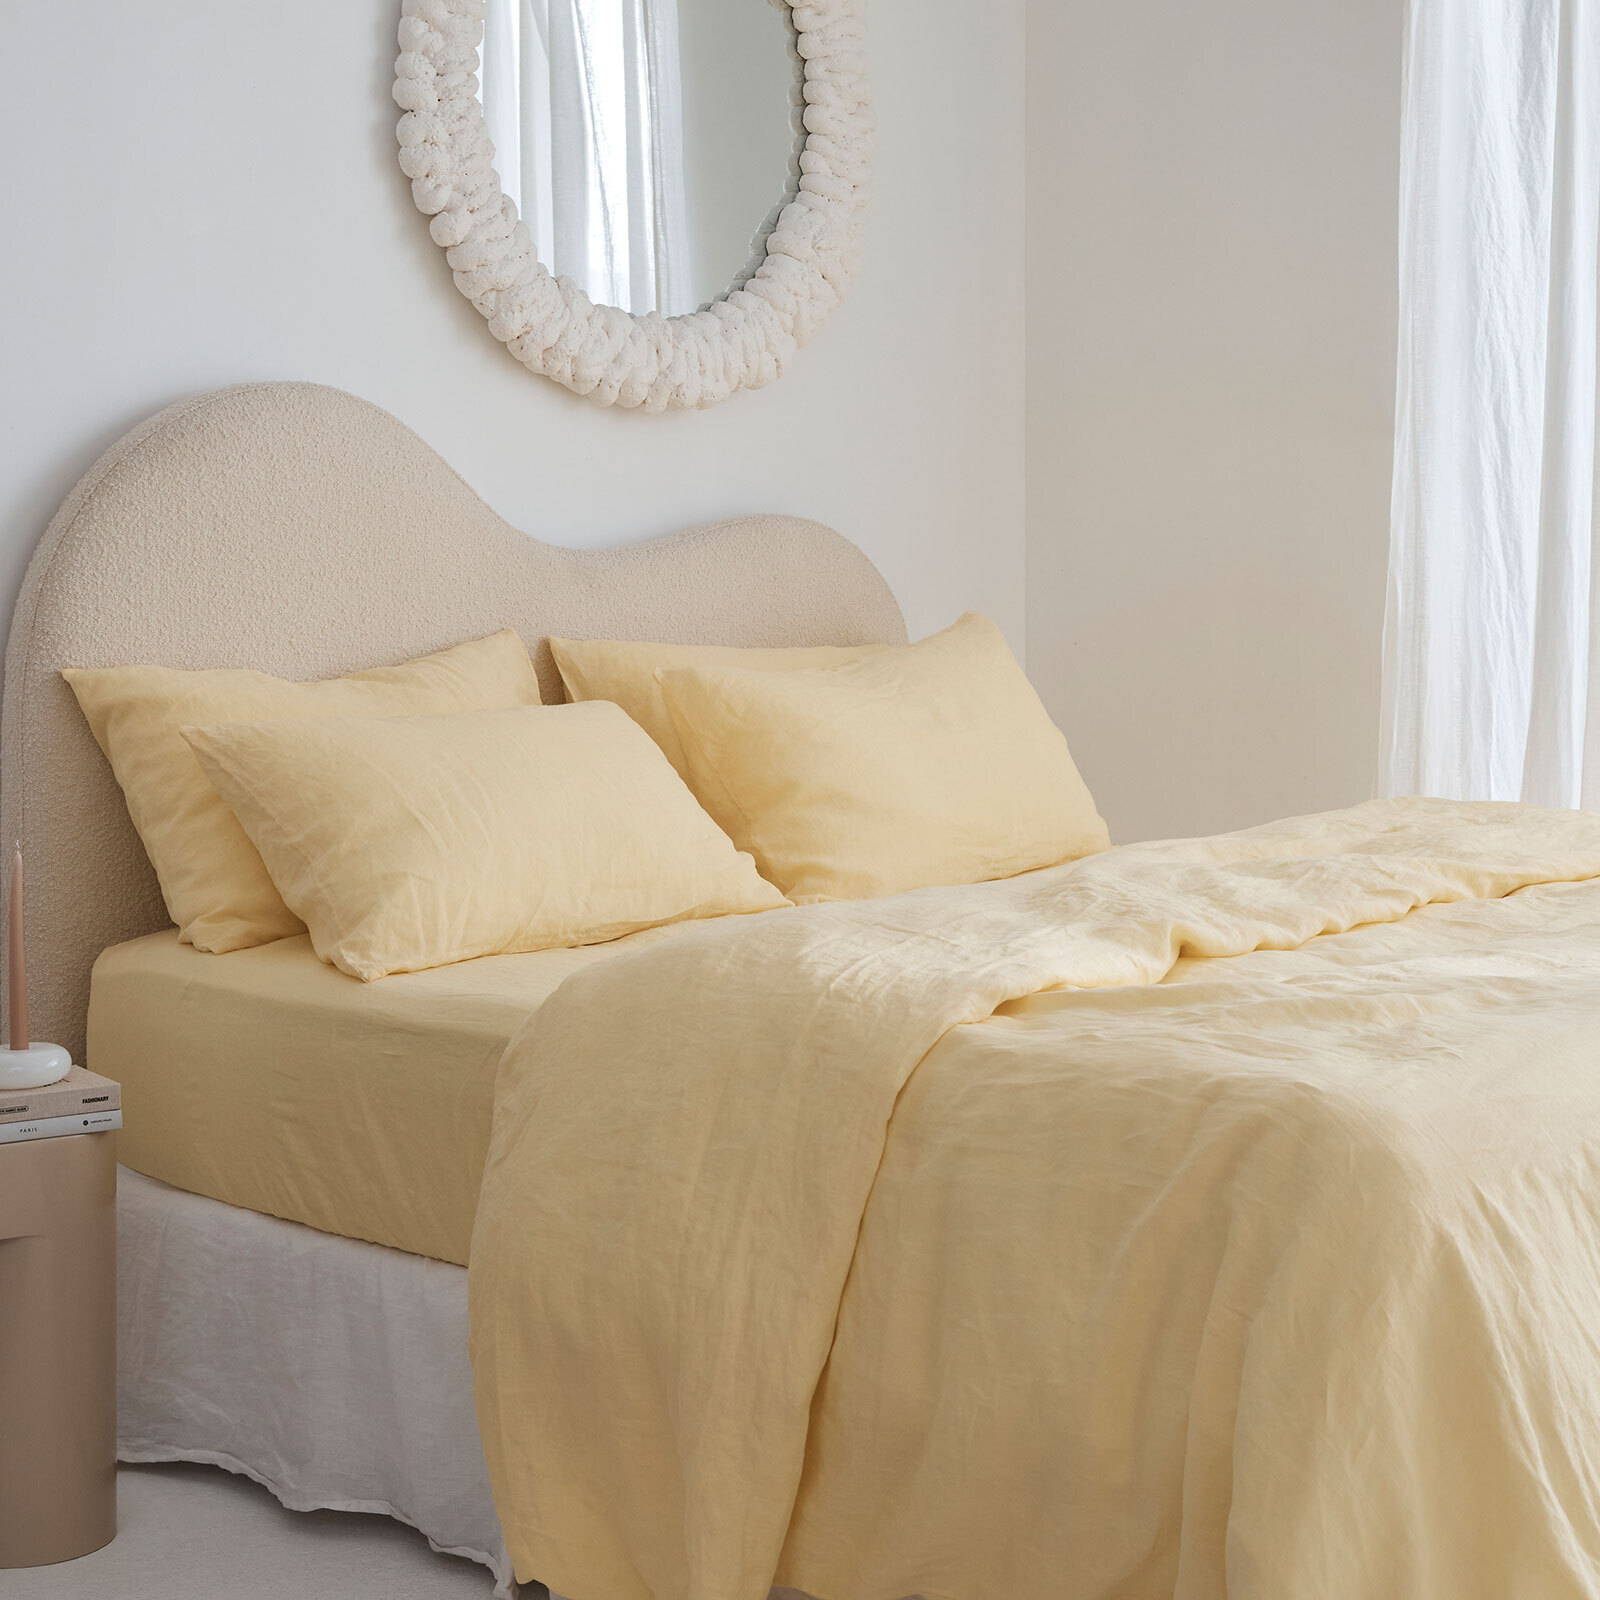 100% pure French linen Duvet Cover in Daisy